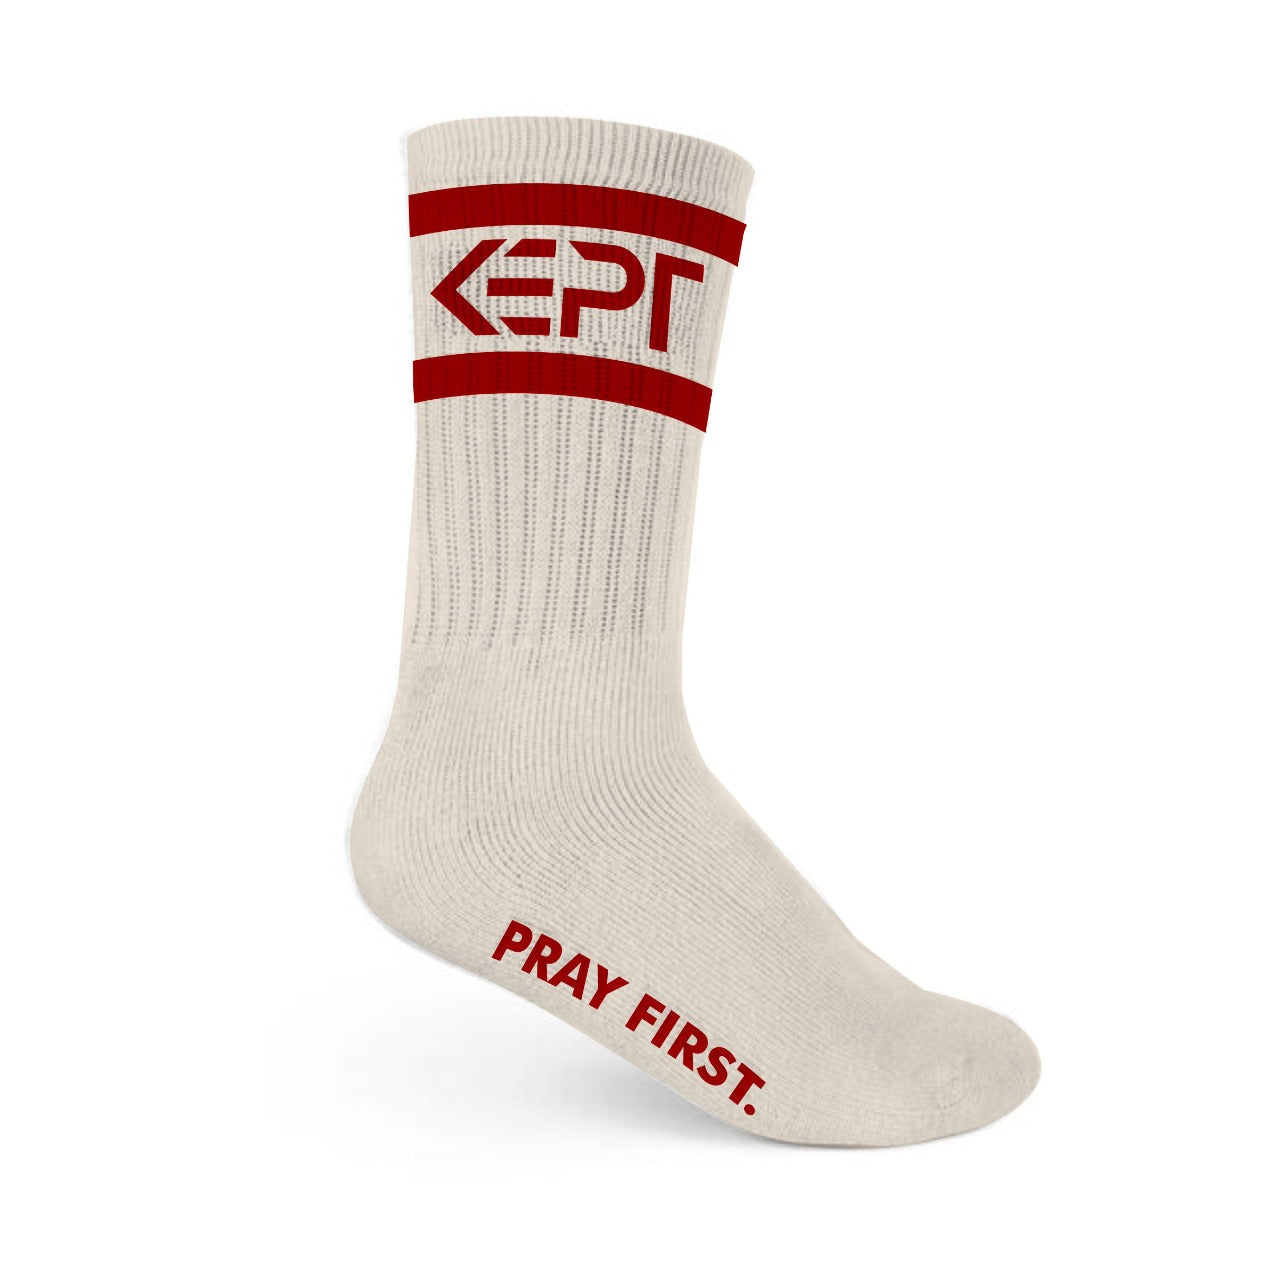 Off-white socks from KEPT with the words “Pray First” written on them.